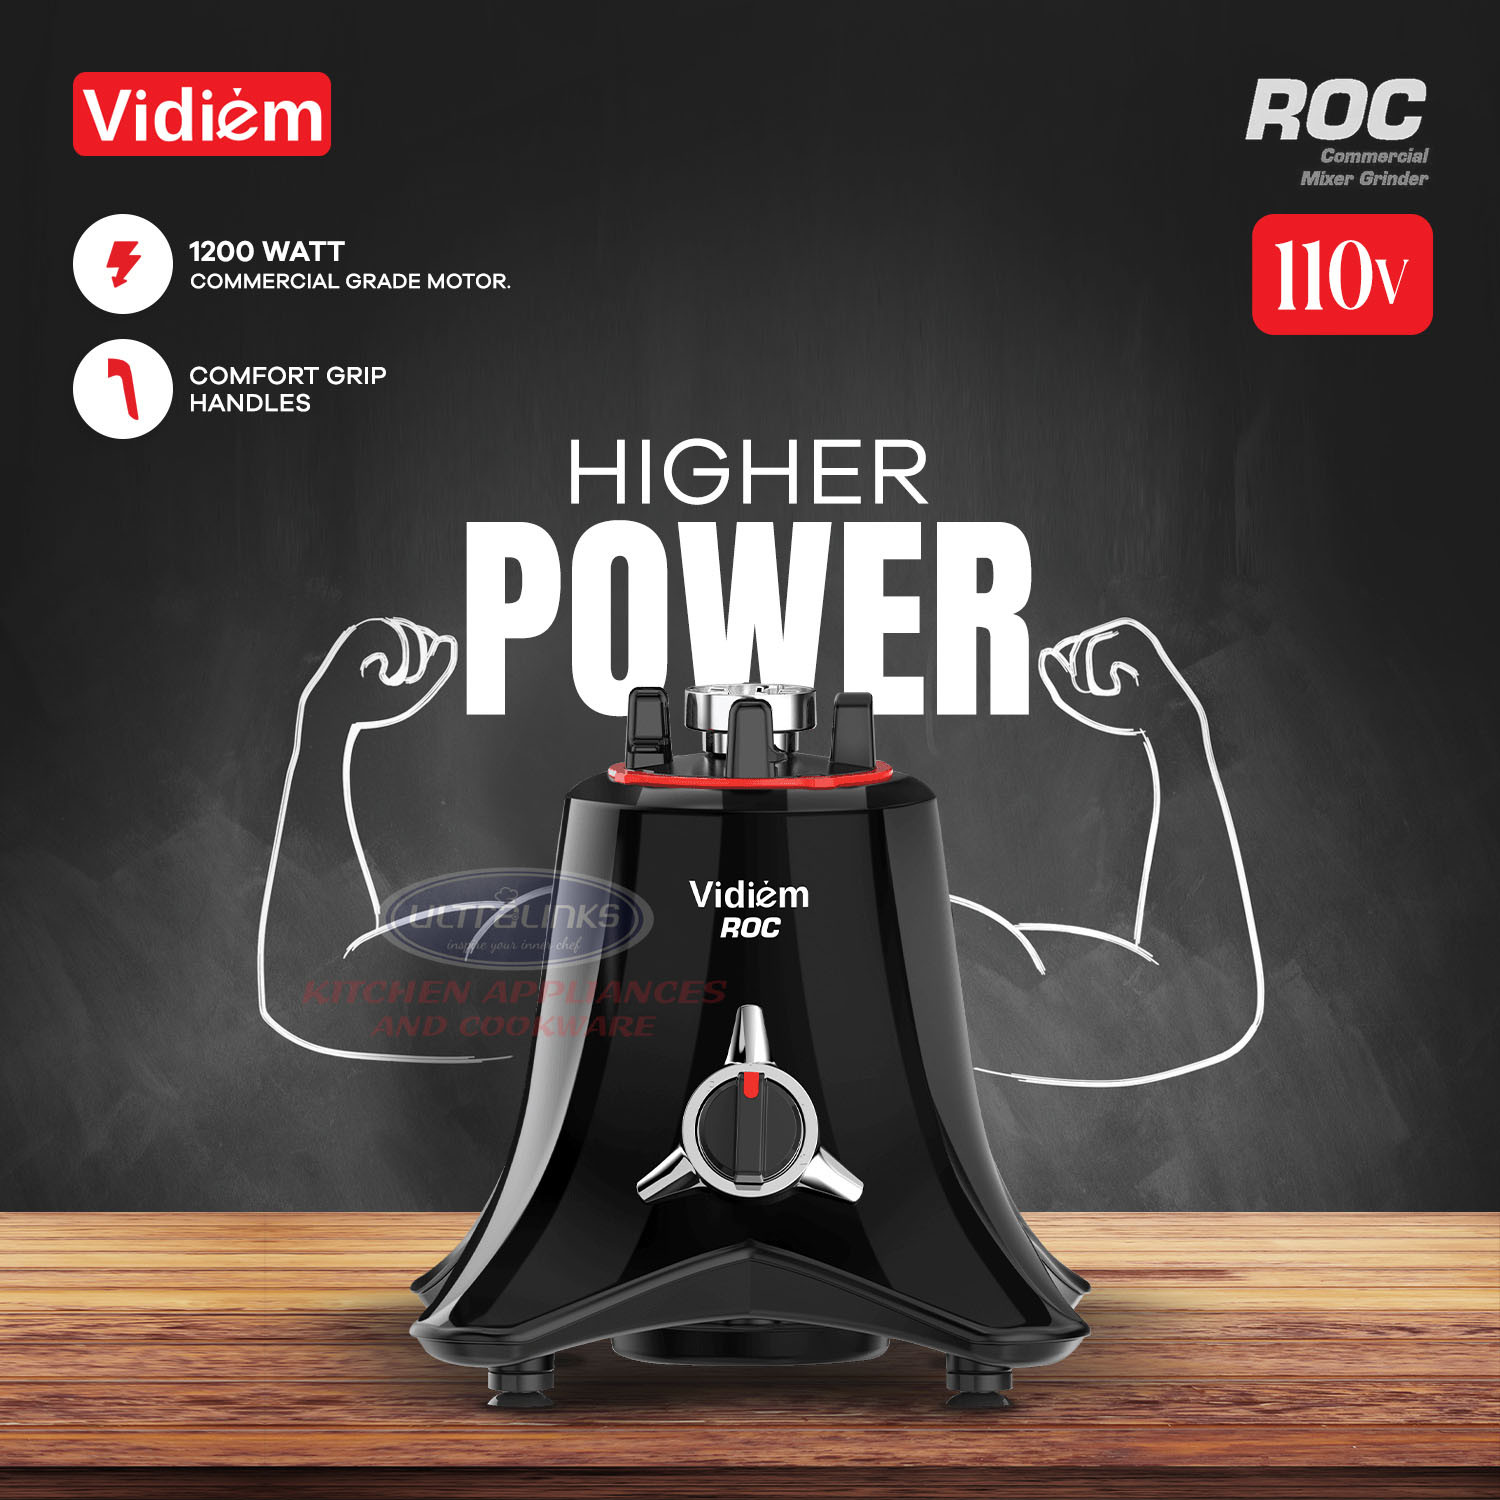 vidiem-roc-1200w-110v-commercial-residential-mixer-grinder-stainless-steel-jars-indian-mixer-grinder-spice-coffee-grinder-jar-for-use-in-canada-usa4